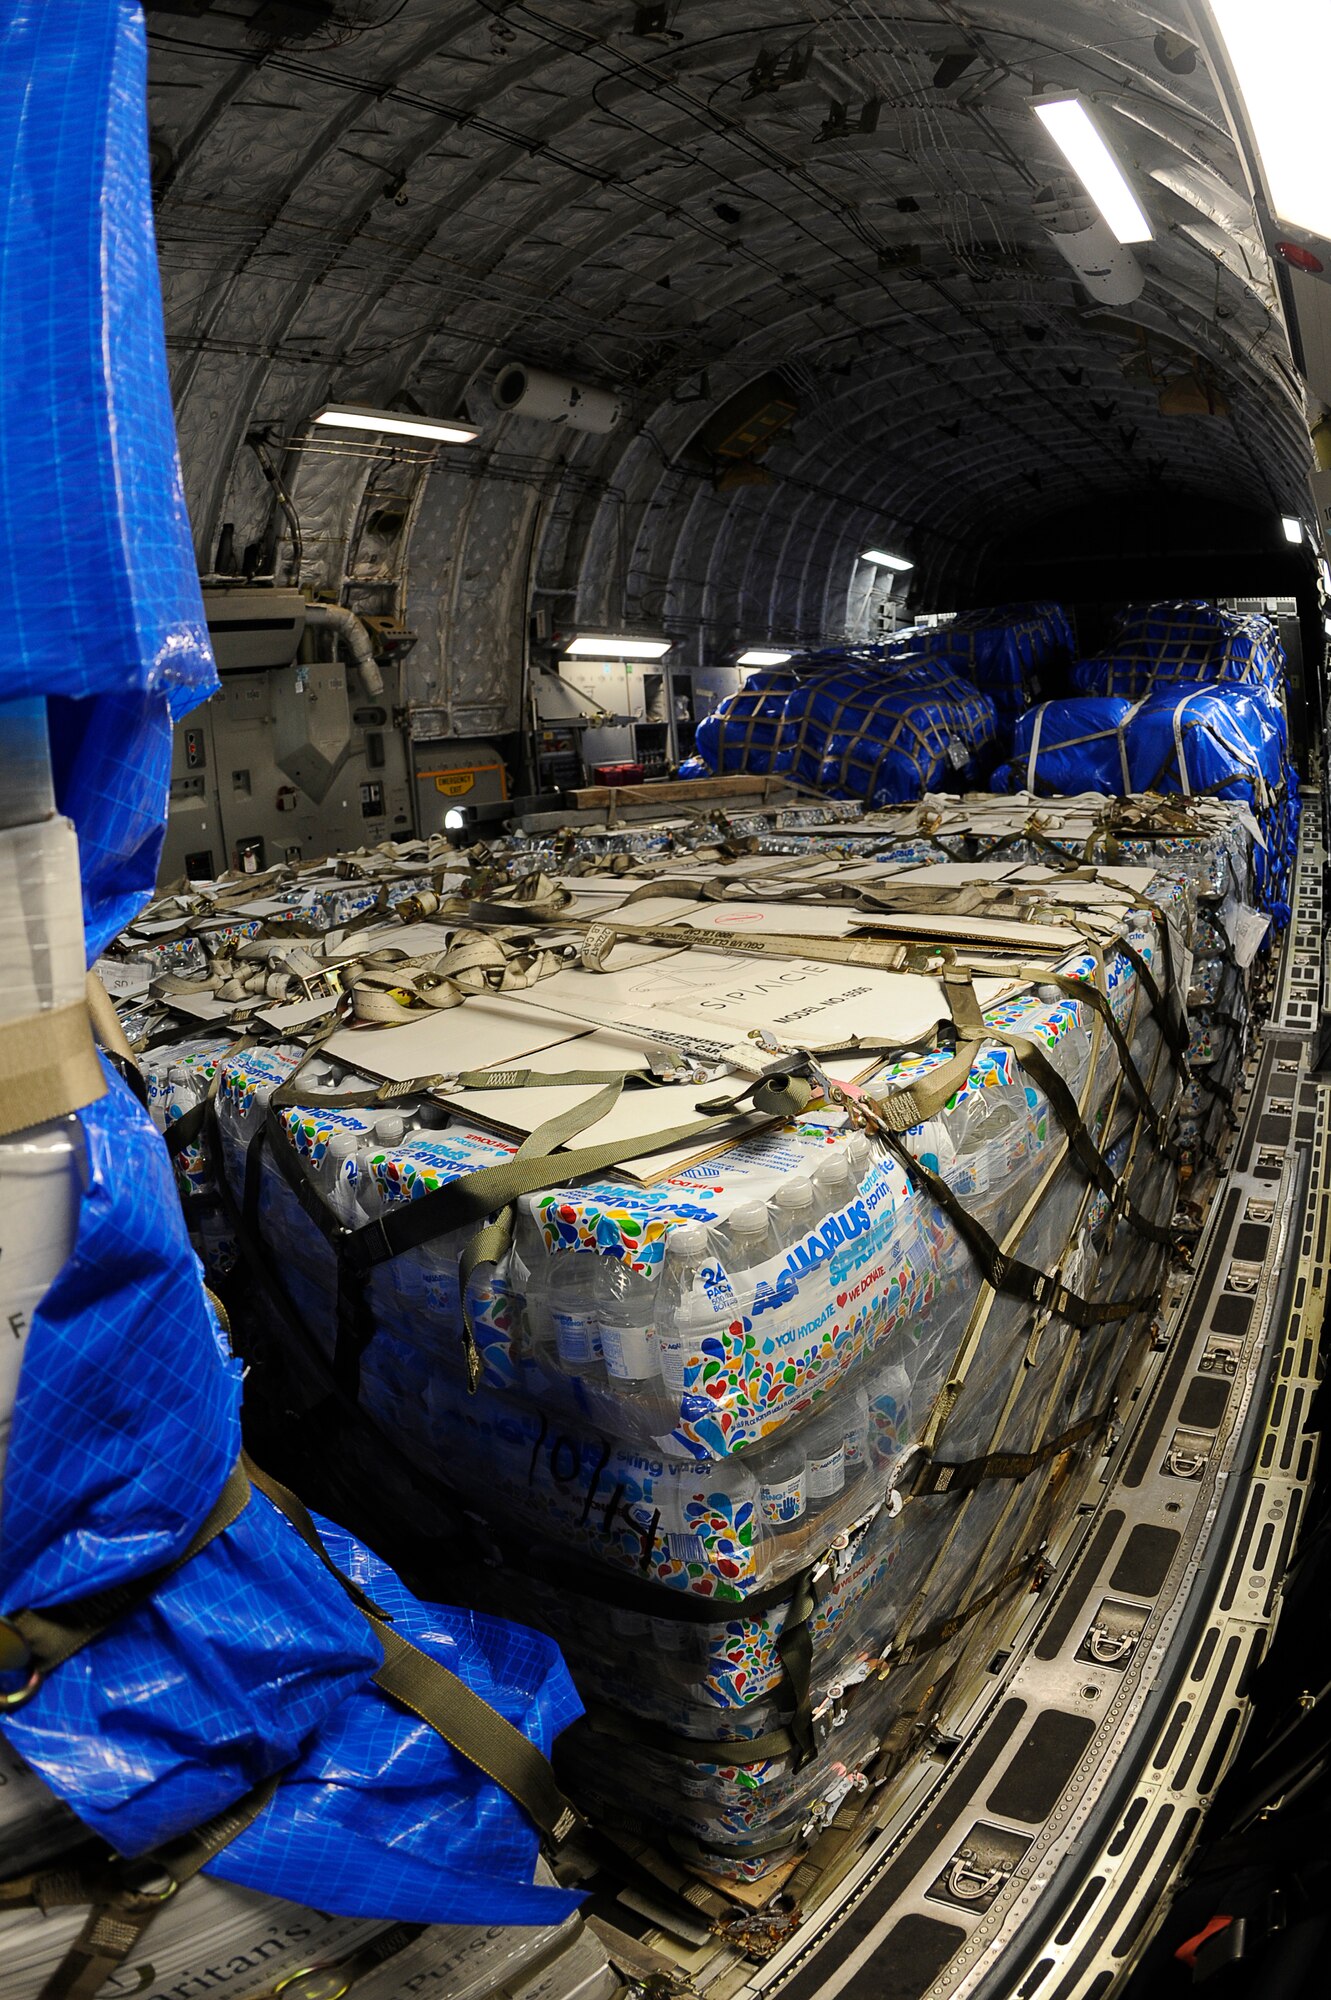 YOKOTA AIR BASE, Japan -- Humanitarian supplies are transported on a C-17 Globemaster III aircraft from Yokota to Sendai Airport  March 20. The 517th Airlift Squadron, Joint Base Elemendorf/Richardson operated the first C-17 into Sendai Airport in support of Operation Tomodachi. (U.S. Air Force photo by/ Master Sgt. Jeromy K. Cross/Released)









